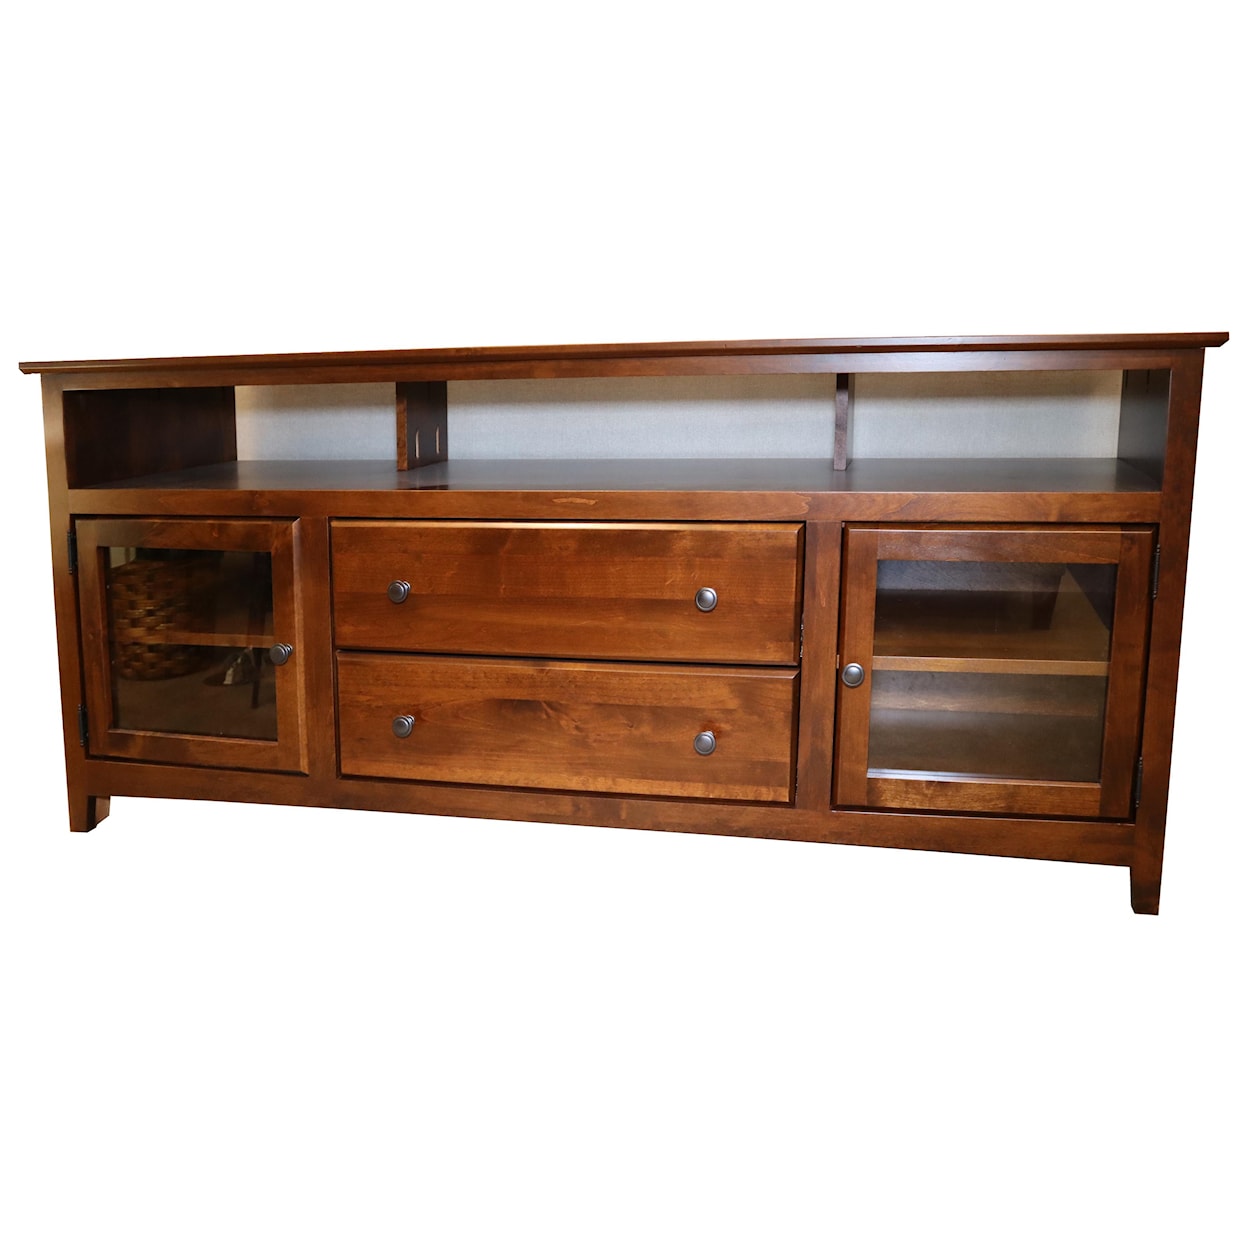 Archbold Furniture DO NOT USE - Shaker Entertainment TV Stand